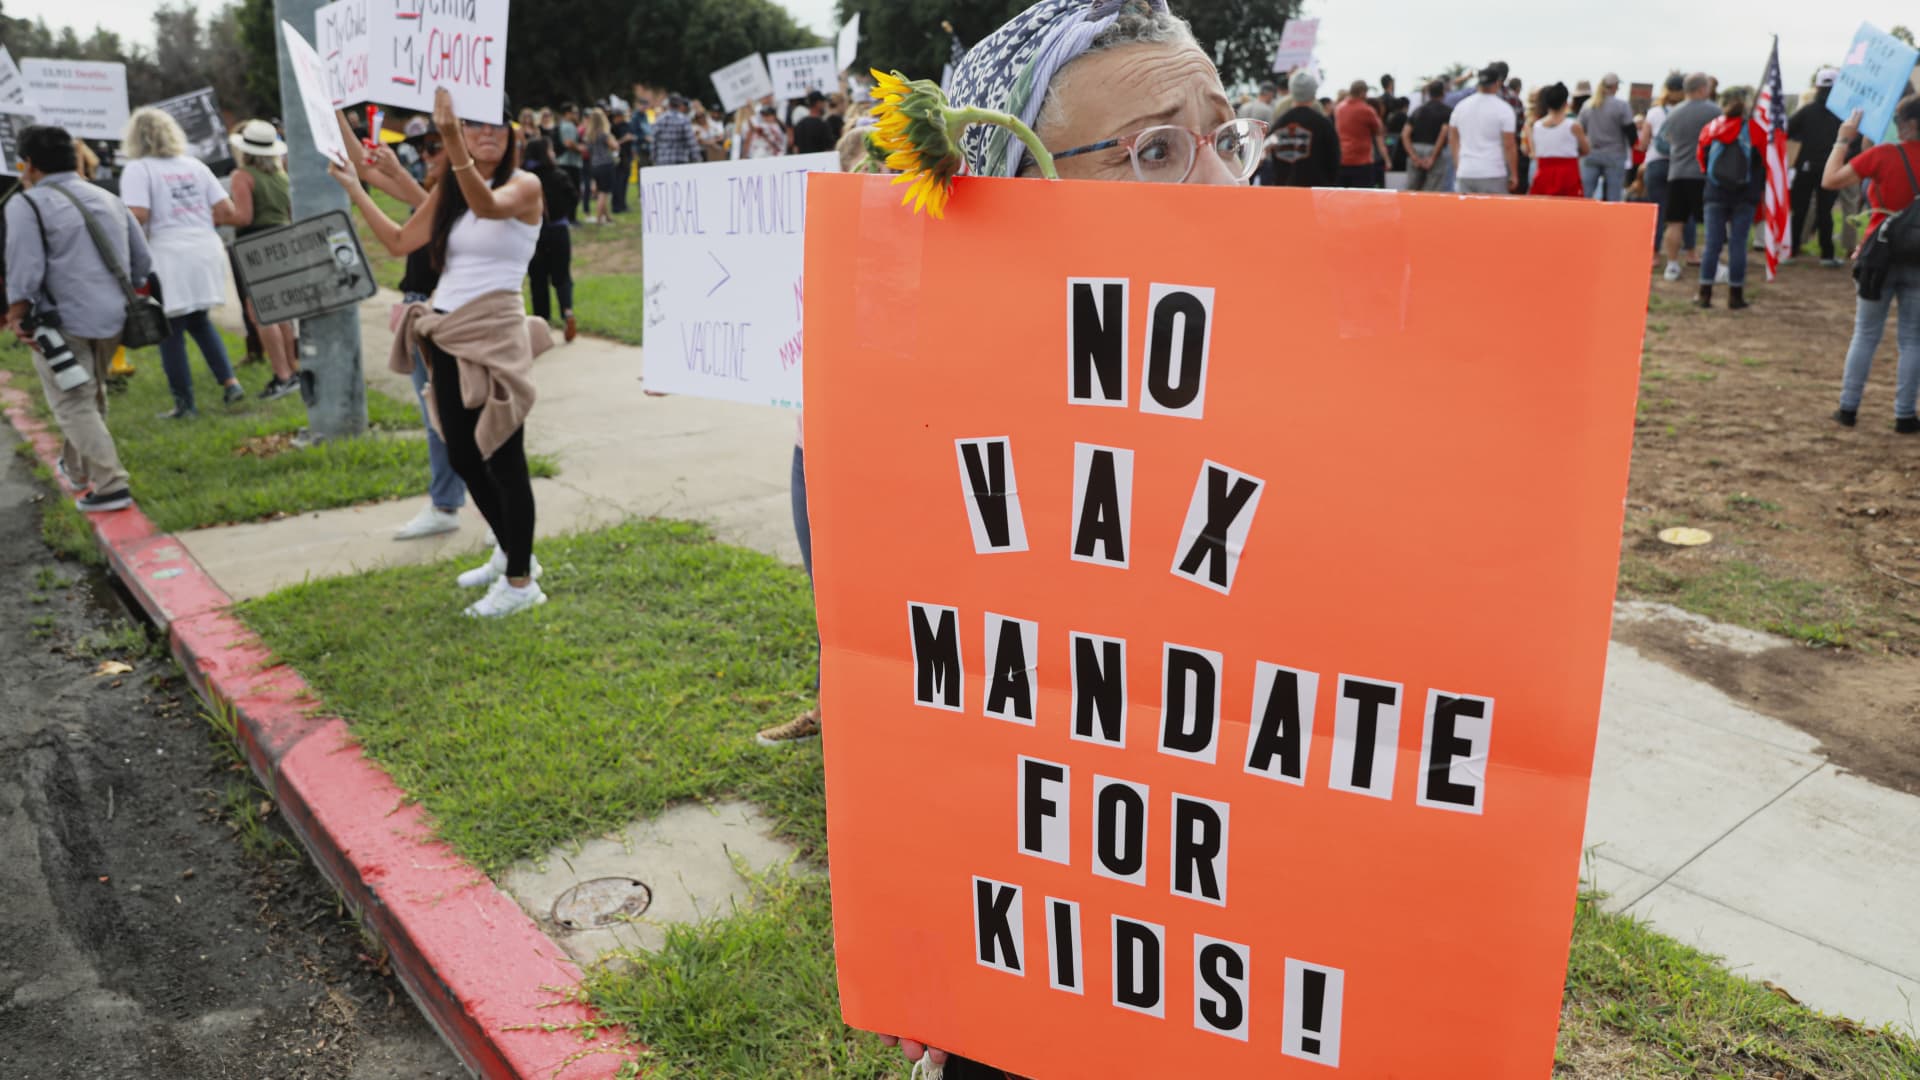 Anti-vaccine protesters stage a protest outside of the San Diego Unified School District office to protest a forced vaccination mandate for students on September 28, 2021 in San Diego, California.